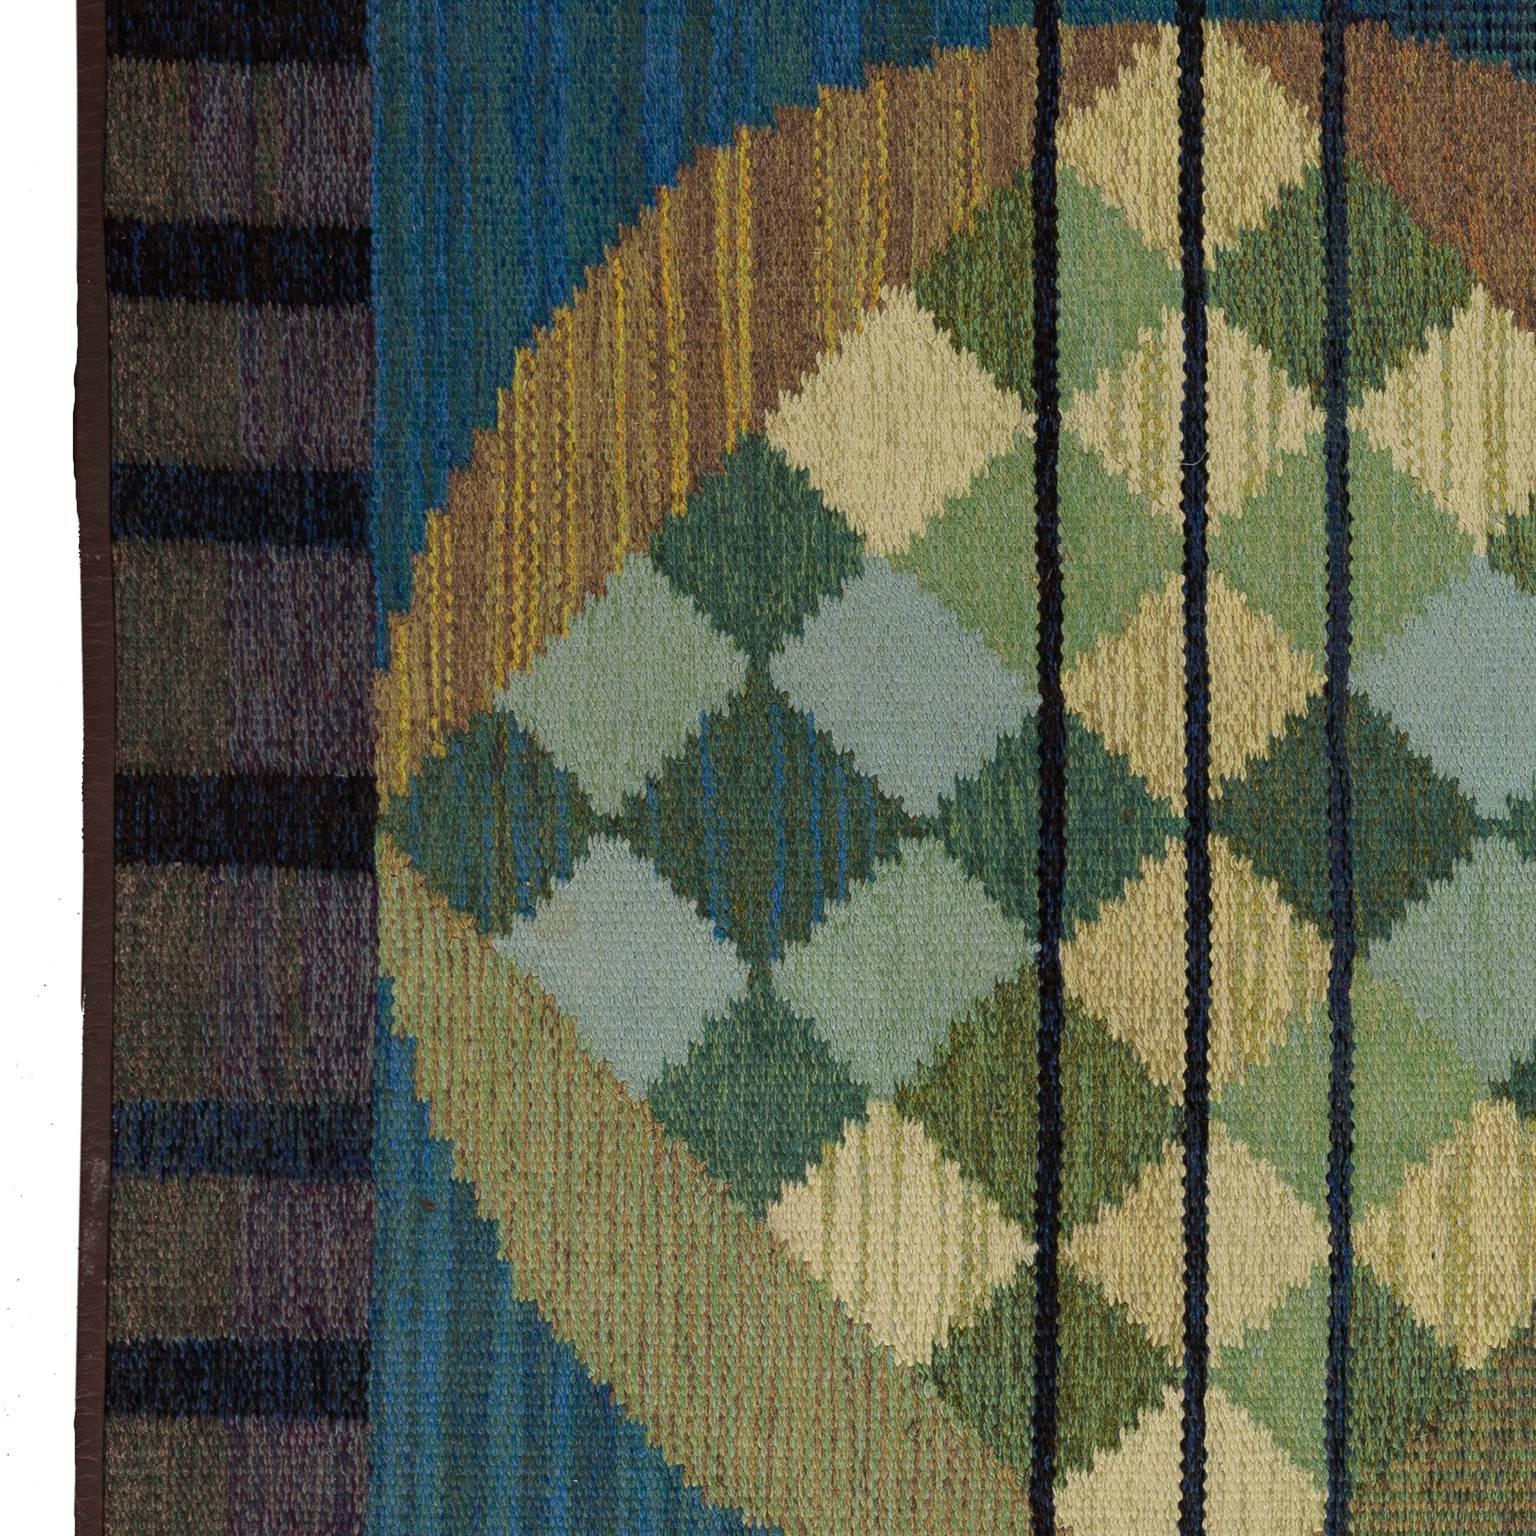 Vintage Scandinavian Modern Handwoven Rug by Vannerus-Rydgran In Excellent Condition For Sale In Stockholm, SE